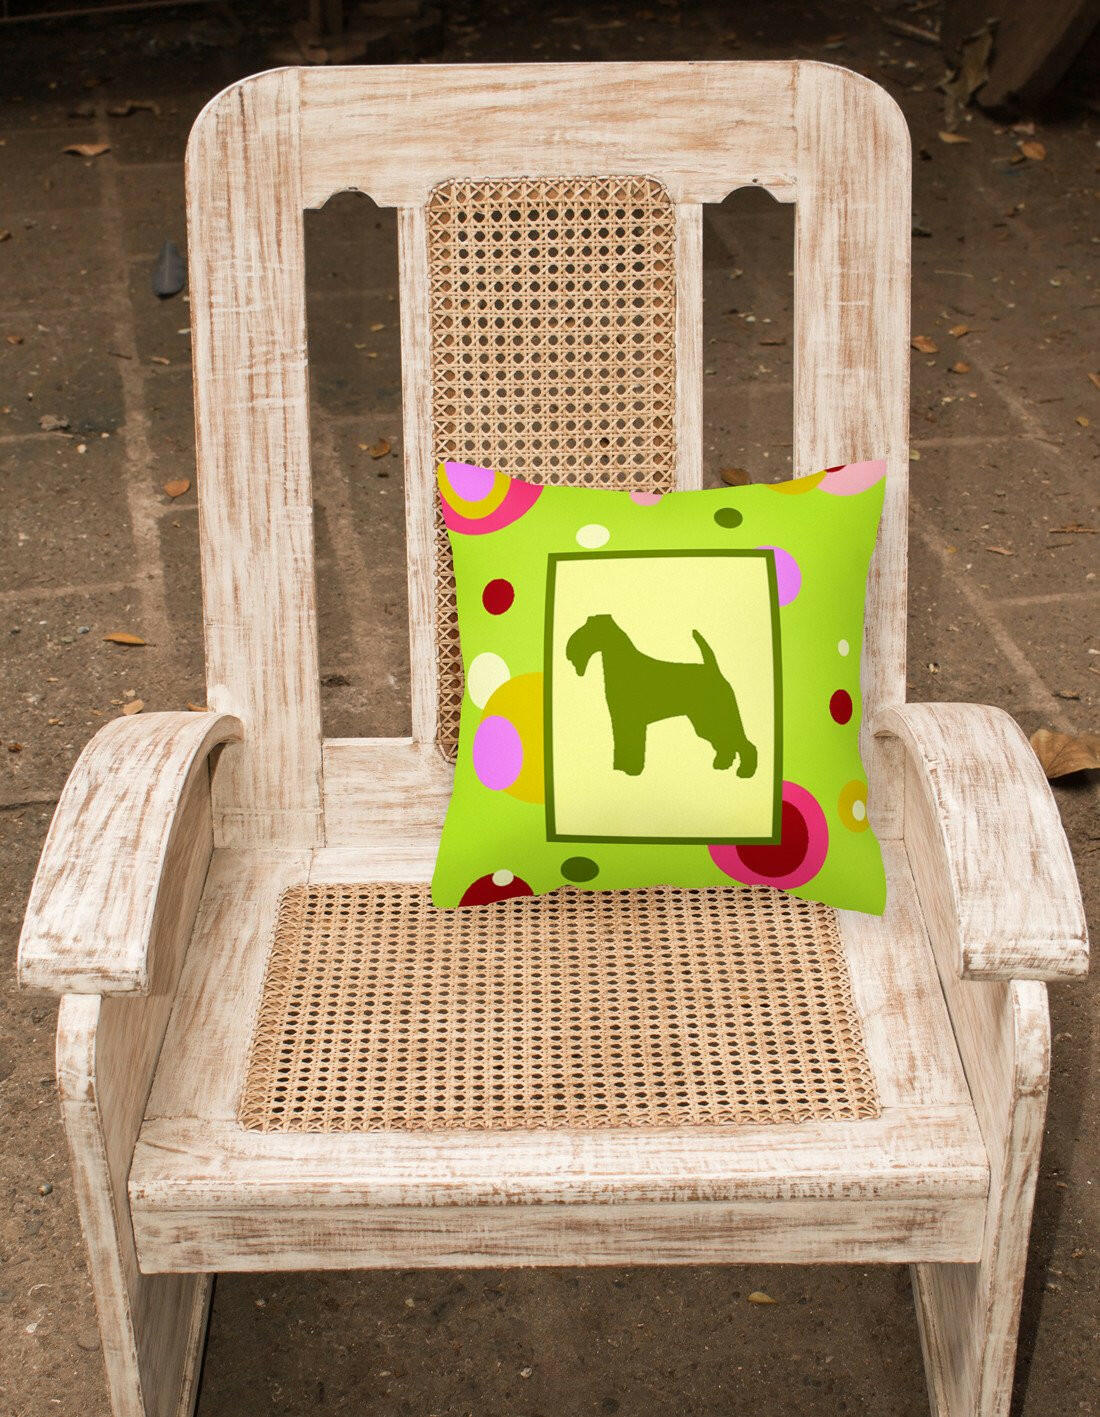 Lime Green Dots Welsh Terrier Fabric Decorative Pillow CK1069PW1414 by Caroline's Treasures